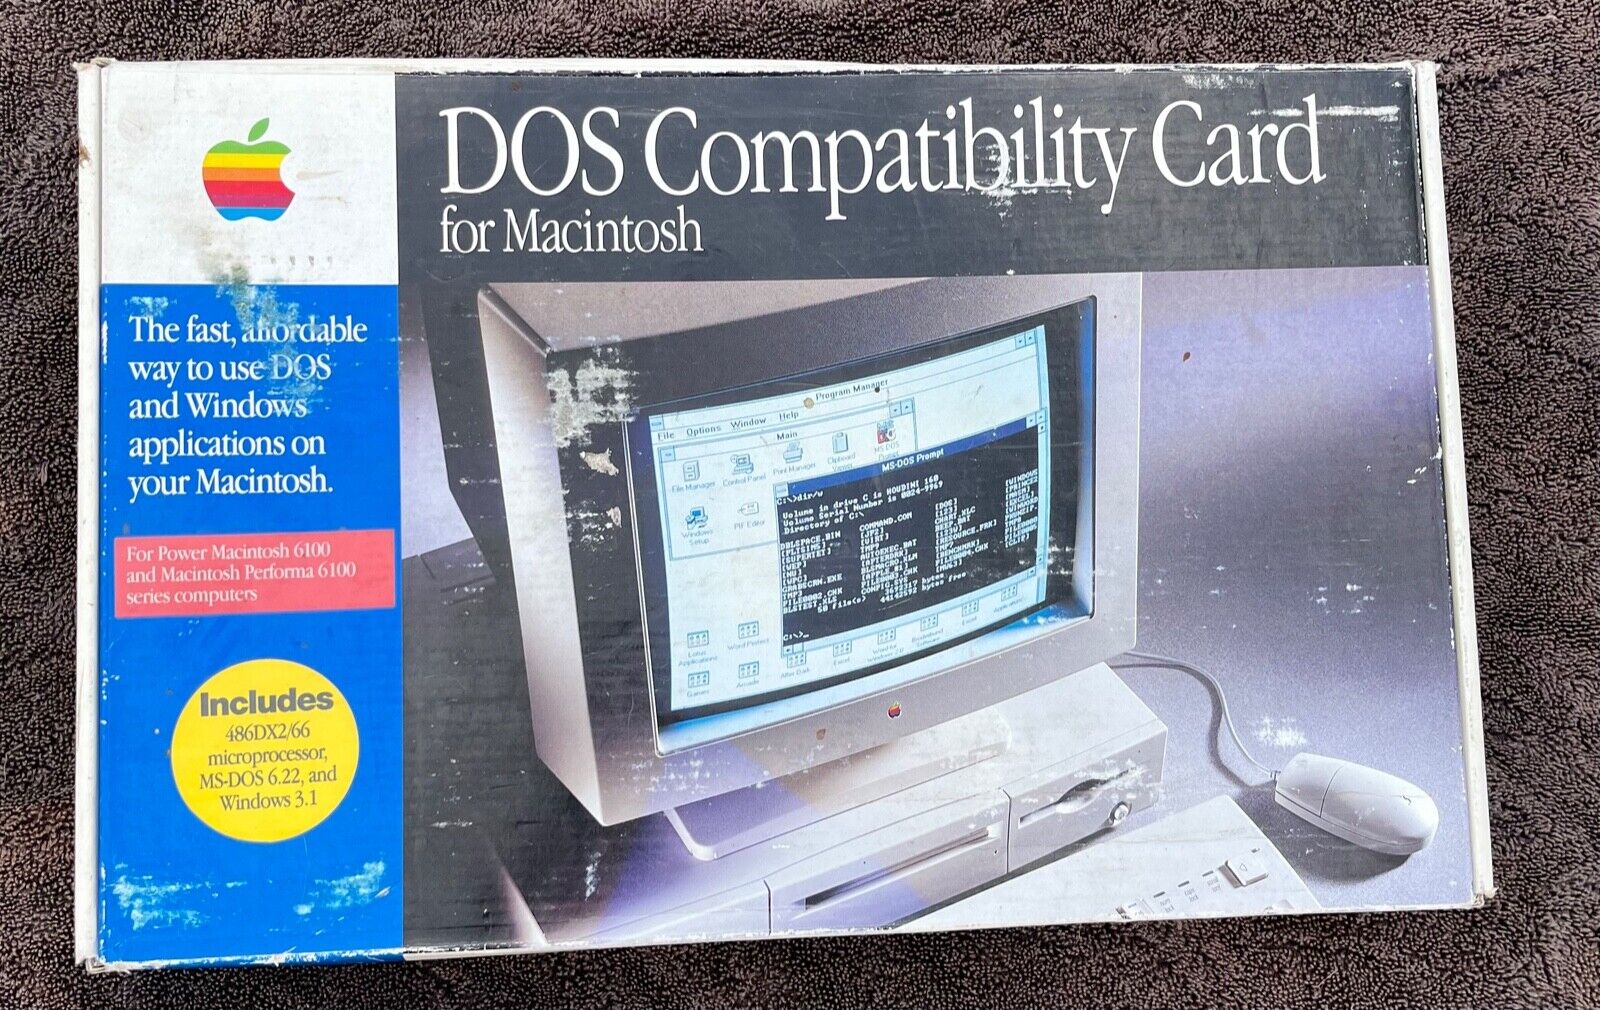 VERY RARE Vintage Apple Macintosh DOS Compatibility PDS Card NOT USED